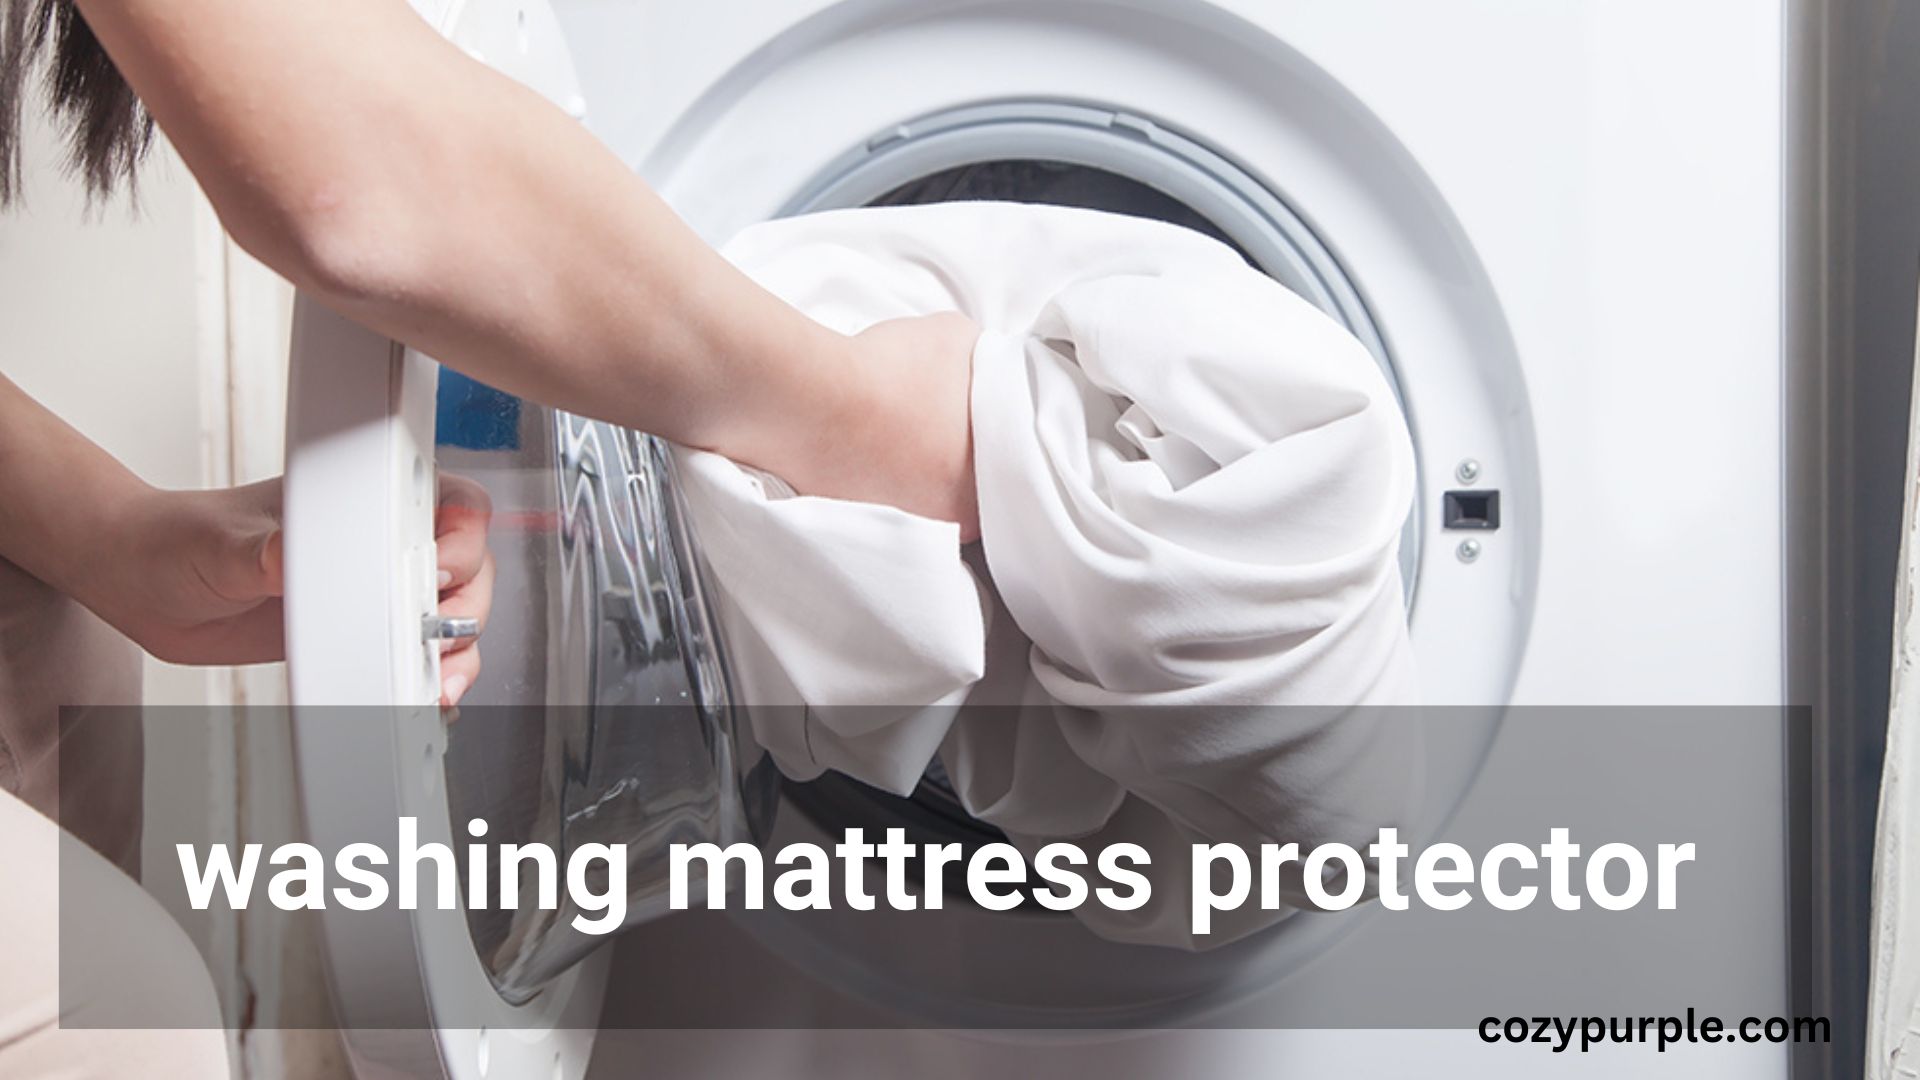 How to wash mattress protector?